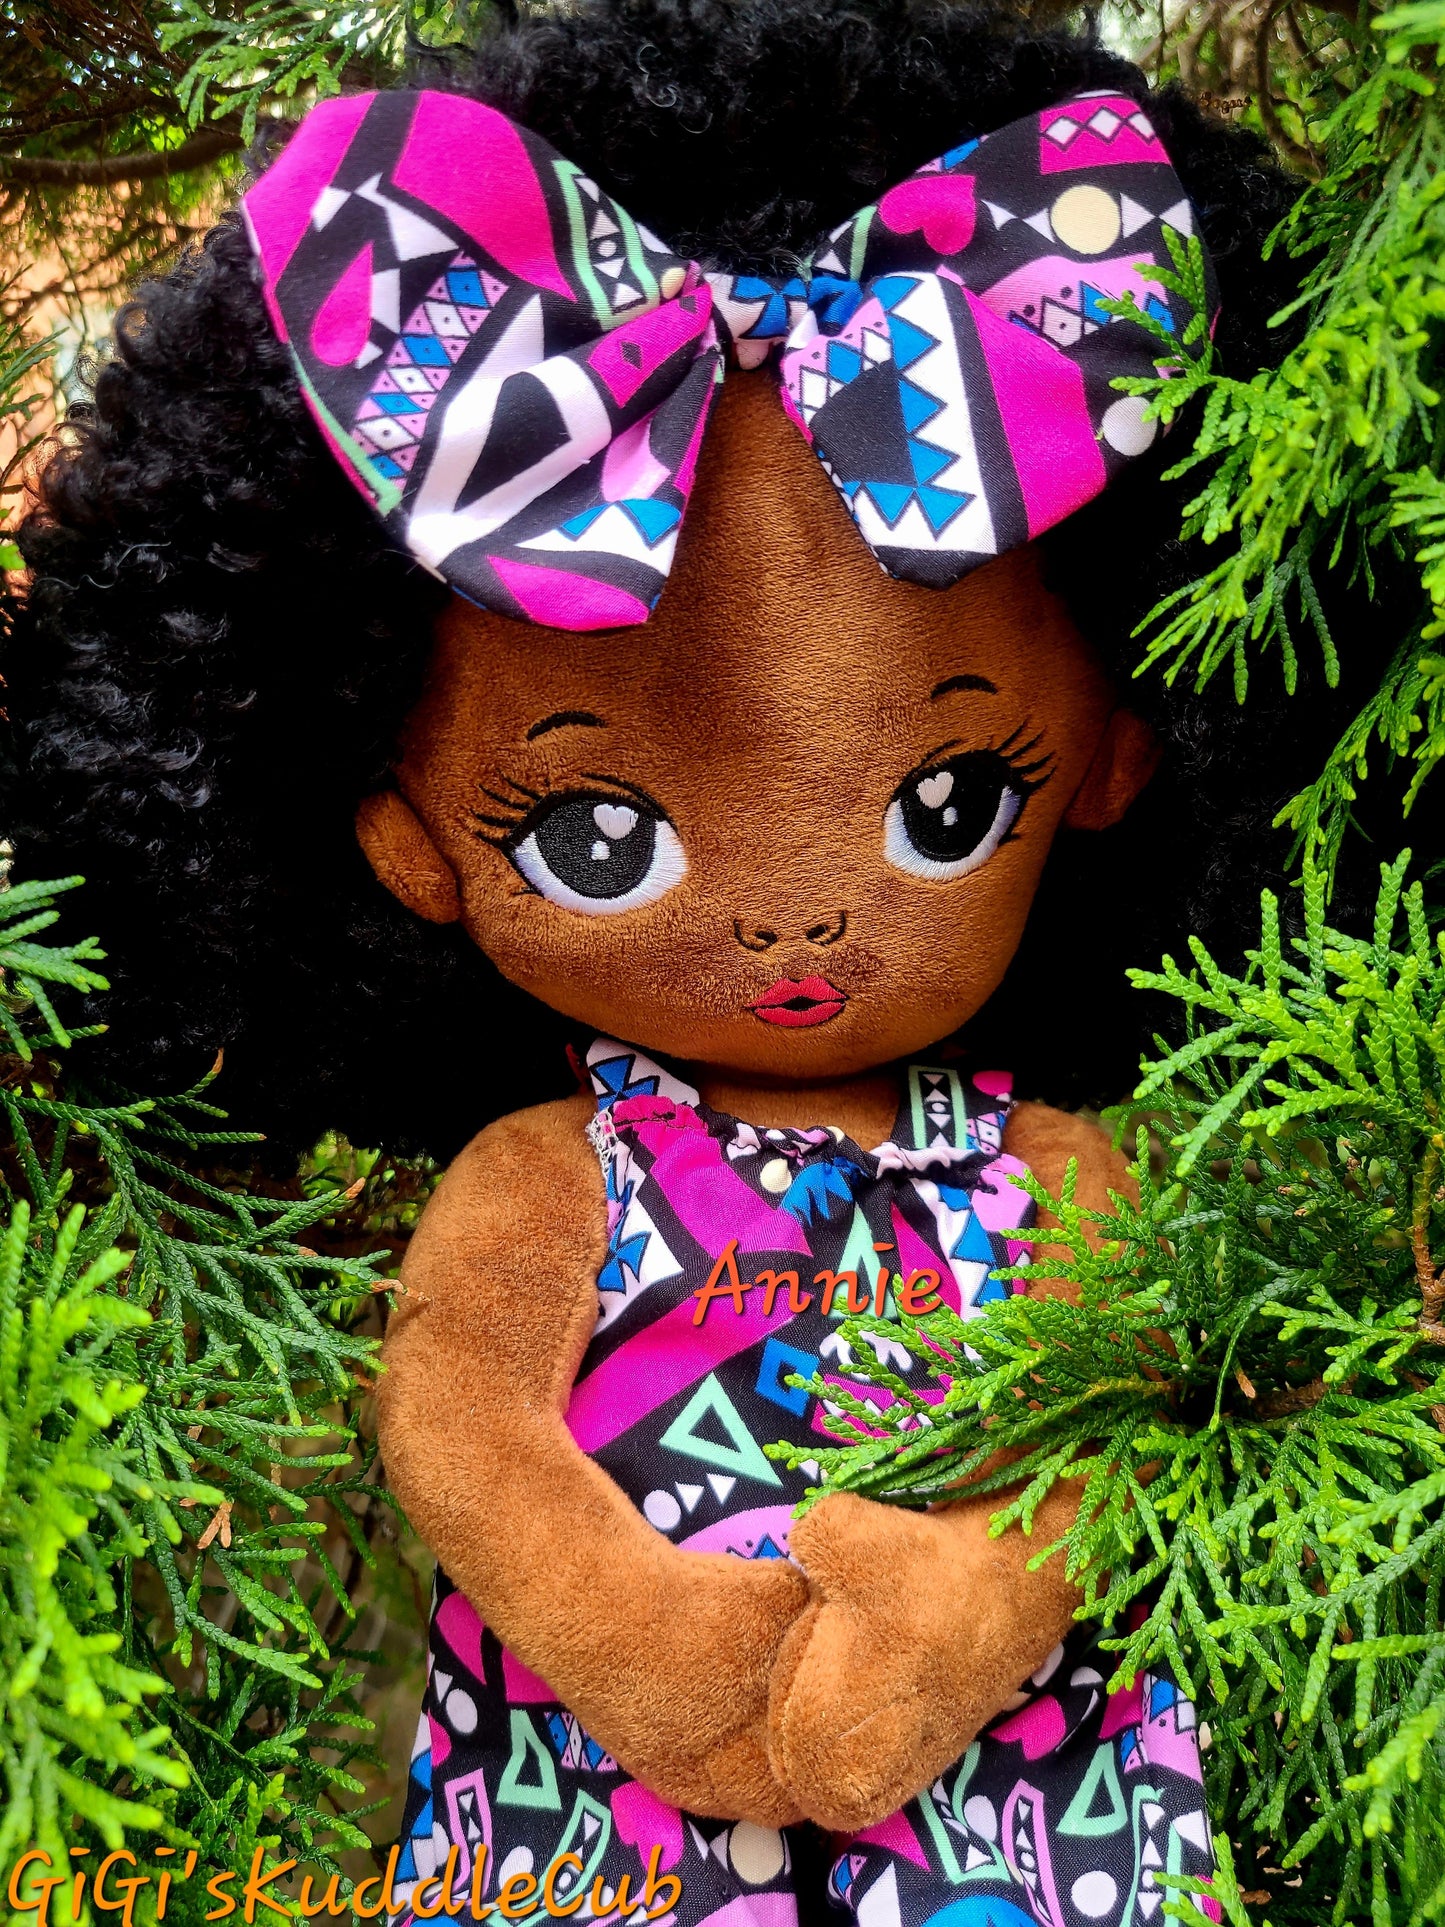 Personalized Soft Rag 19"Brown Skin Baby Girl Plush Rag Doll Toy/Decor/ Handmade Baby Gift/ Personalized Gift